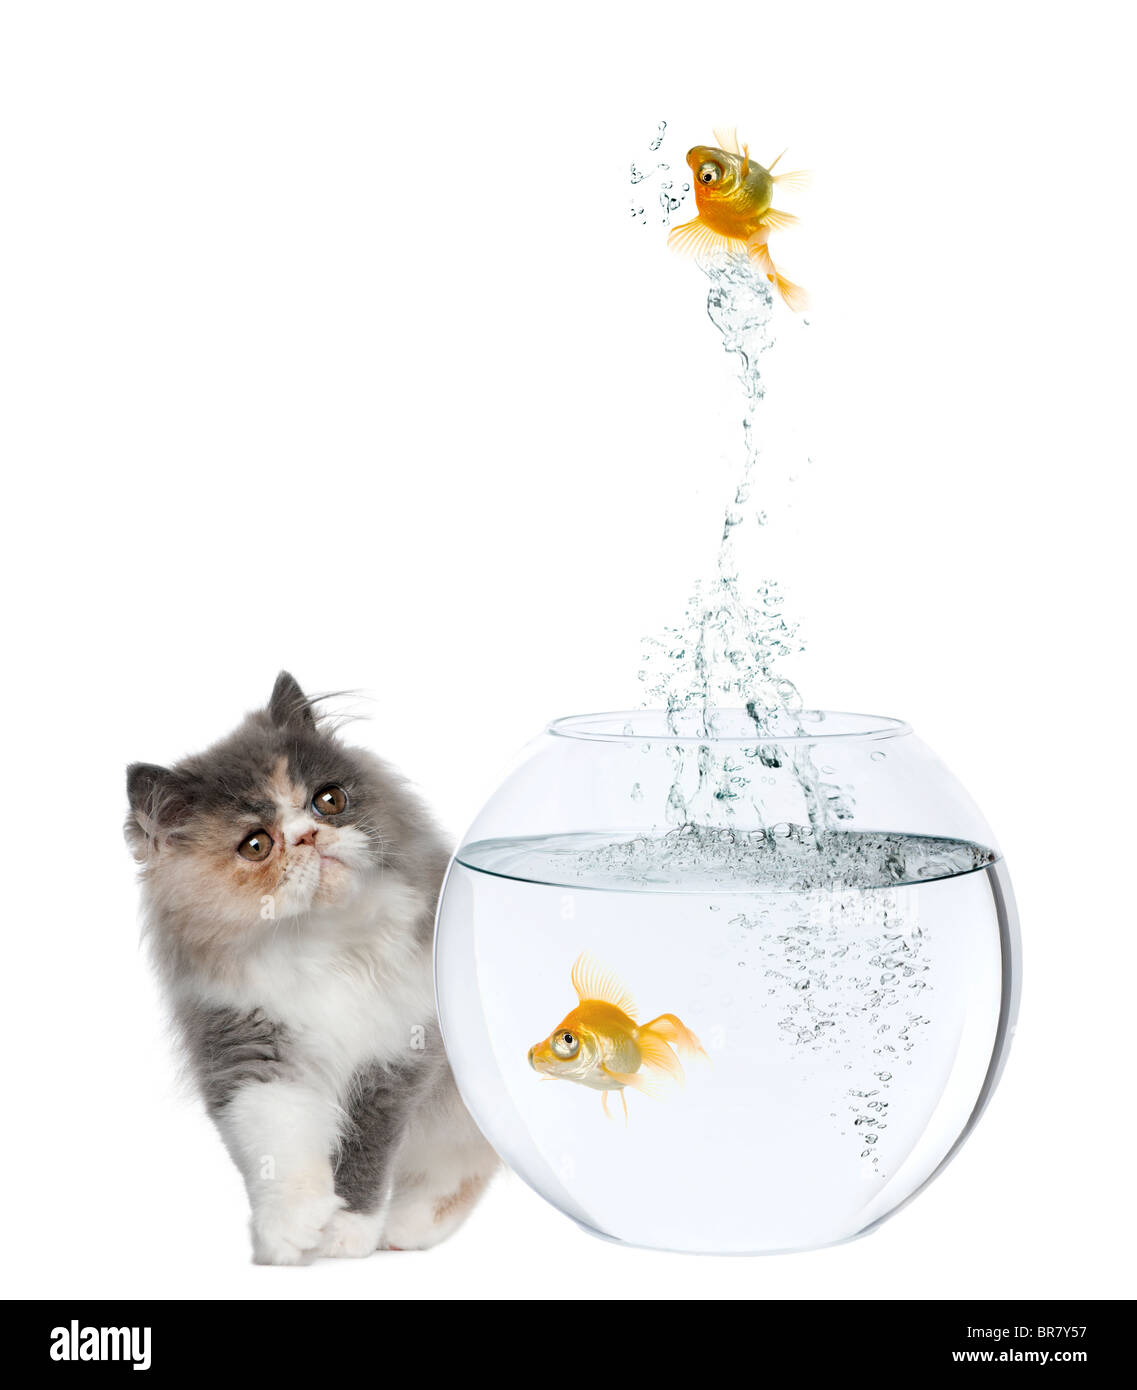 Persian Kitten, 3 months old, watching goldfish jump out of fish bowl in front of white background Stock Photo